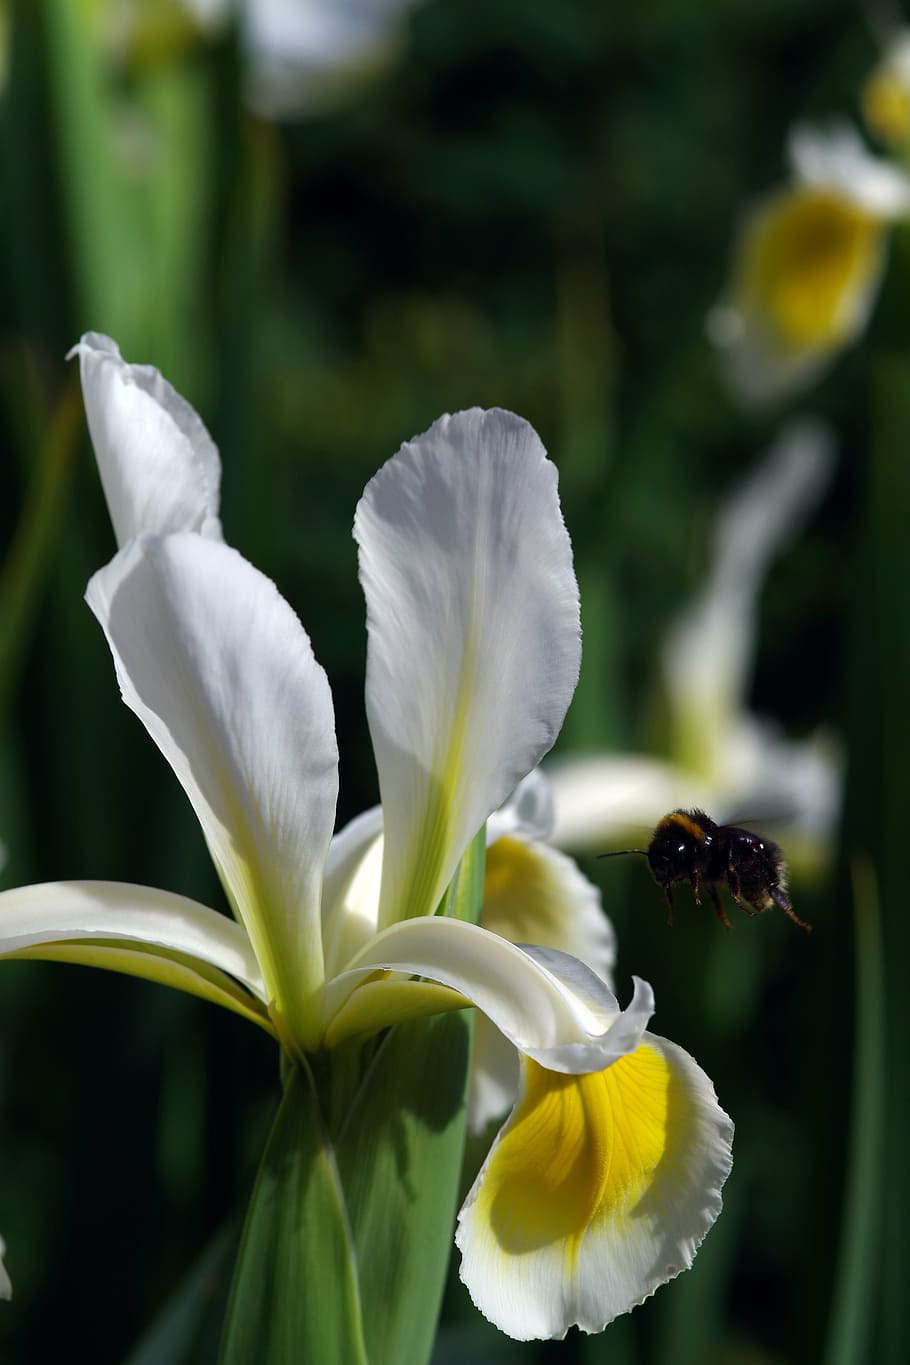 iris, bee, flower, white, garden, outdoors, bumble, insect